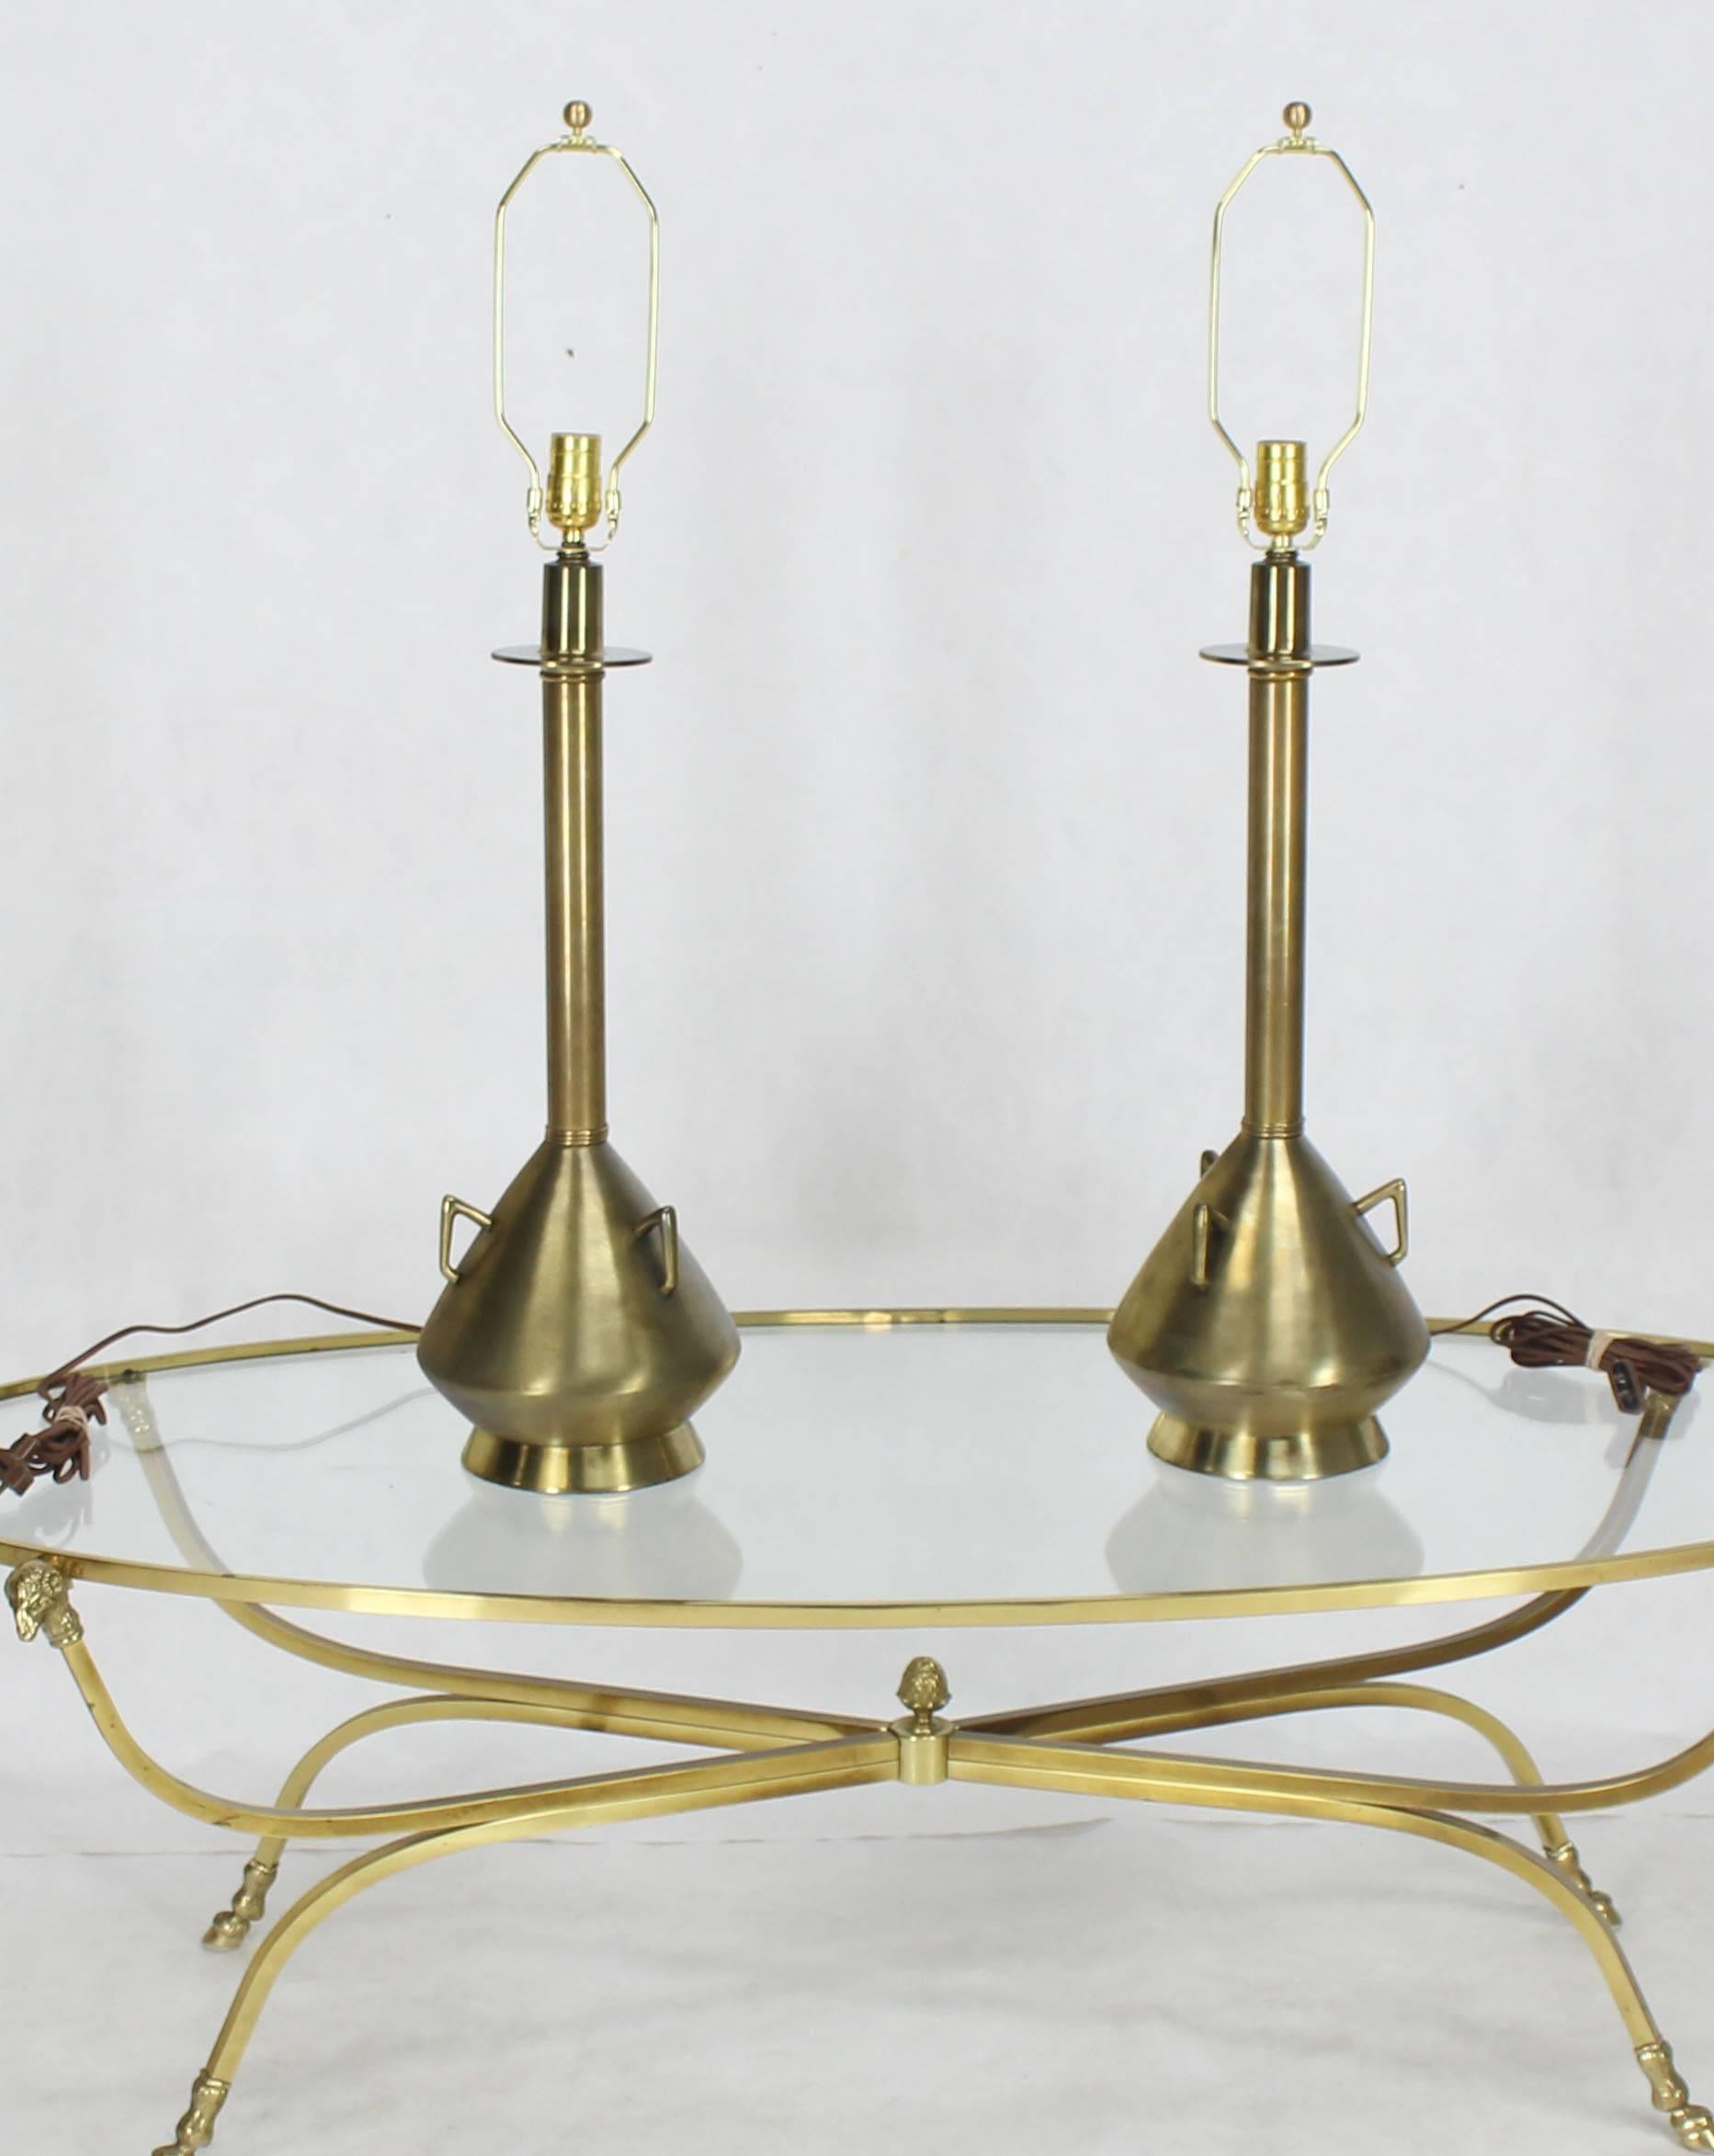 Pair of Brass Finish Metal Jug Shape Mid-Century Modern Table Lamps In Excellent Condition For Sale In Rockaway, NJ